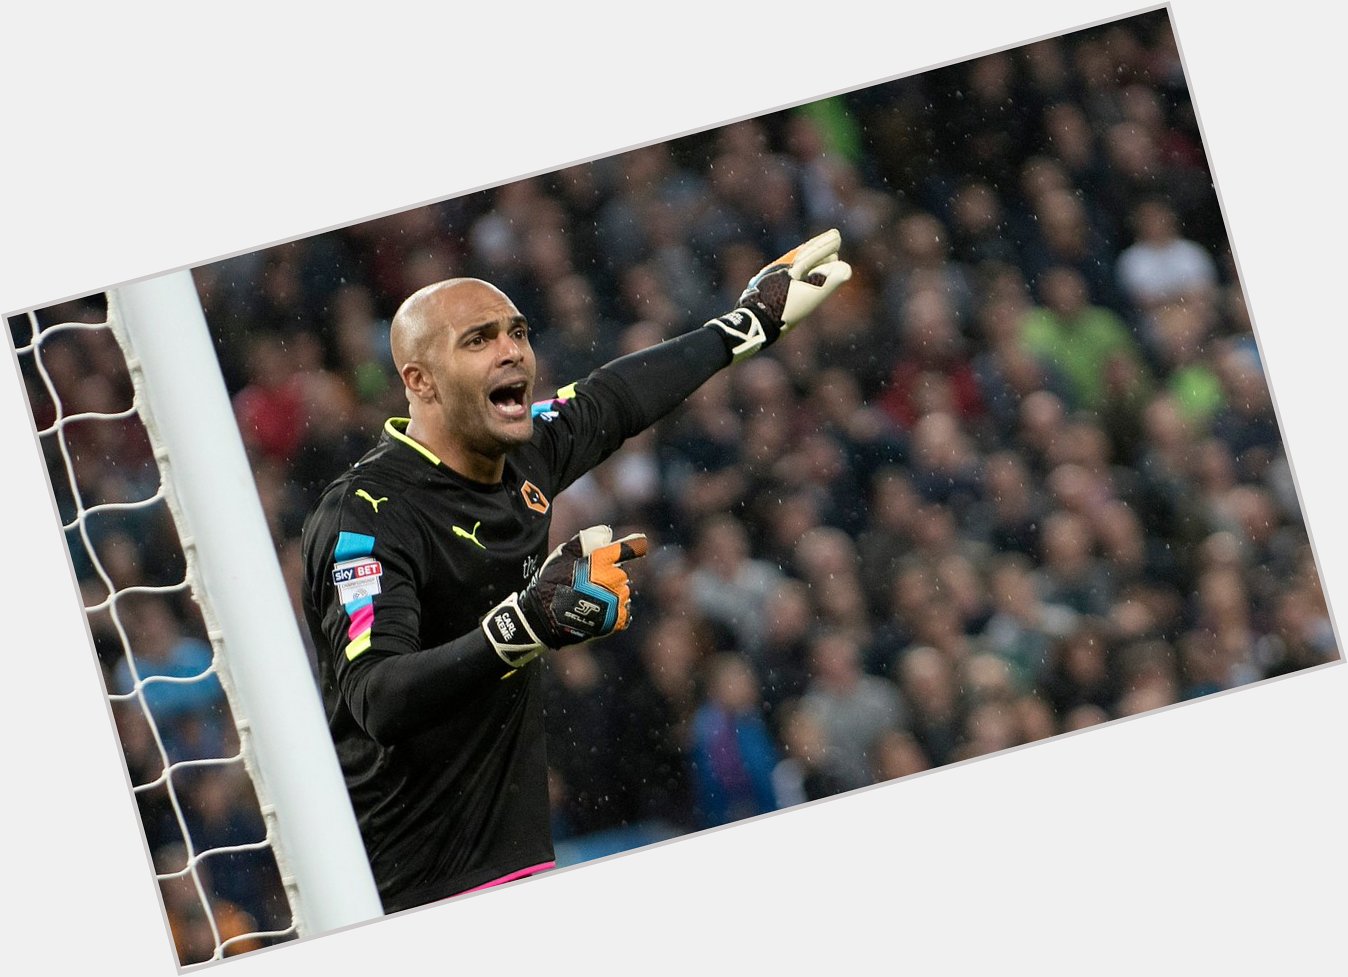 A very happy birthday to the Wolves number ! The legend that is Carl_Ikeme turns 33 today, have a great day! 